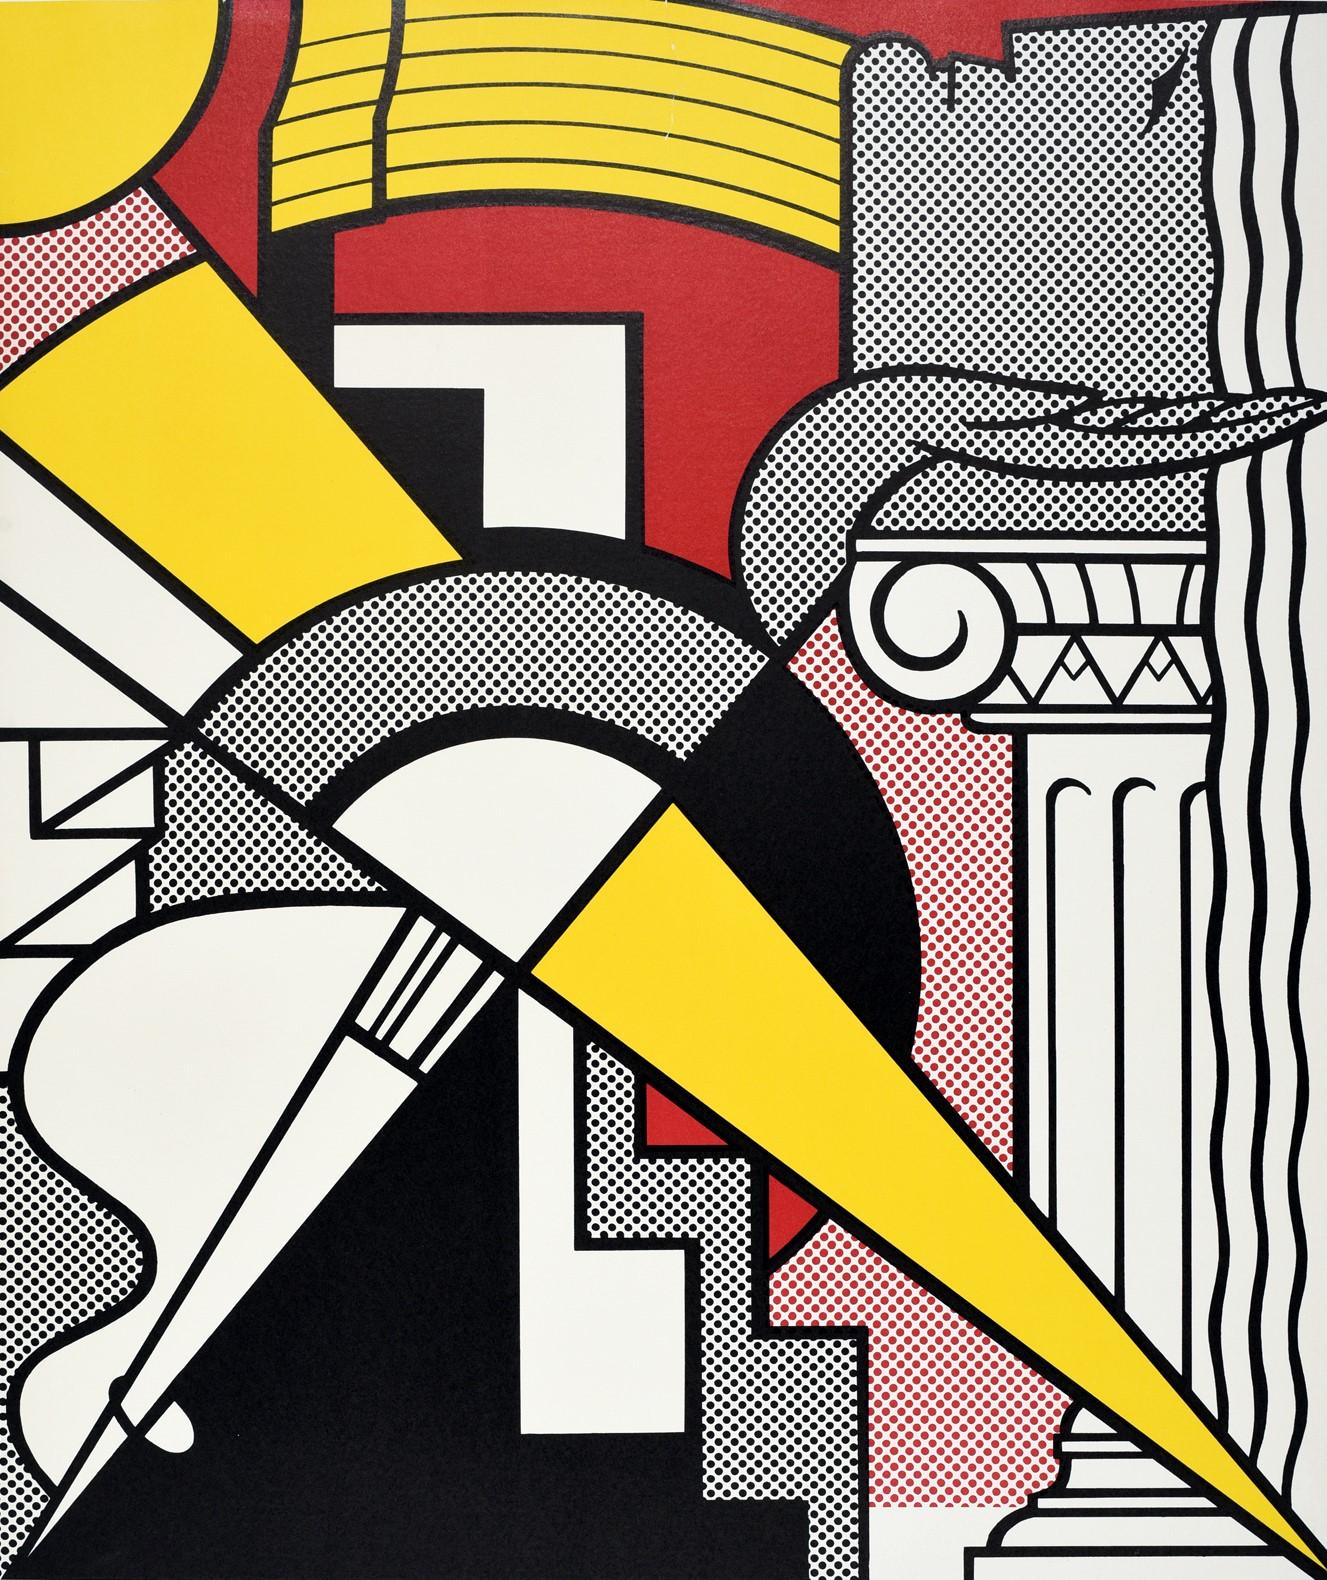 Original vintage art exhibition poster featuring the colorful arrow and column design by the notable pop artist Roy Lichtenstein (1923-1997) with abstract geometric lines and half-tone dots to create a comic strip inspired image, the information